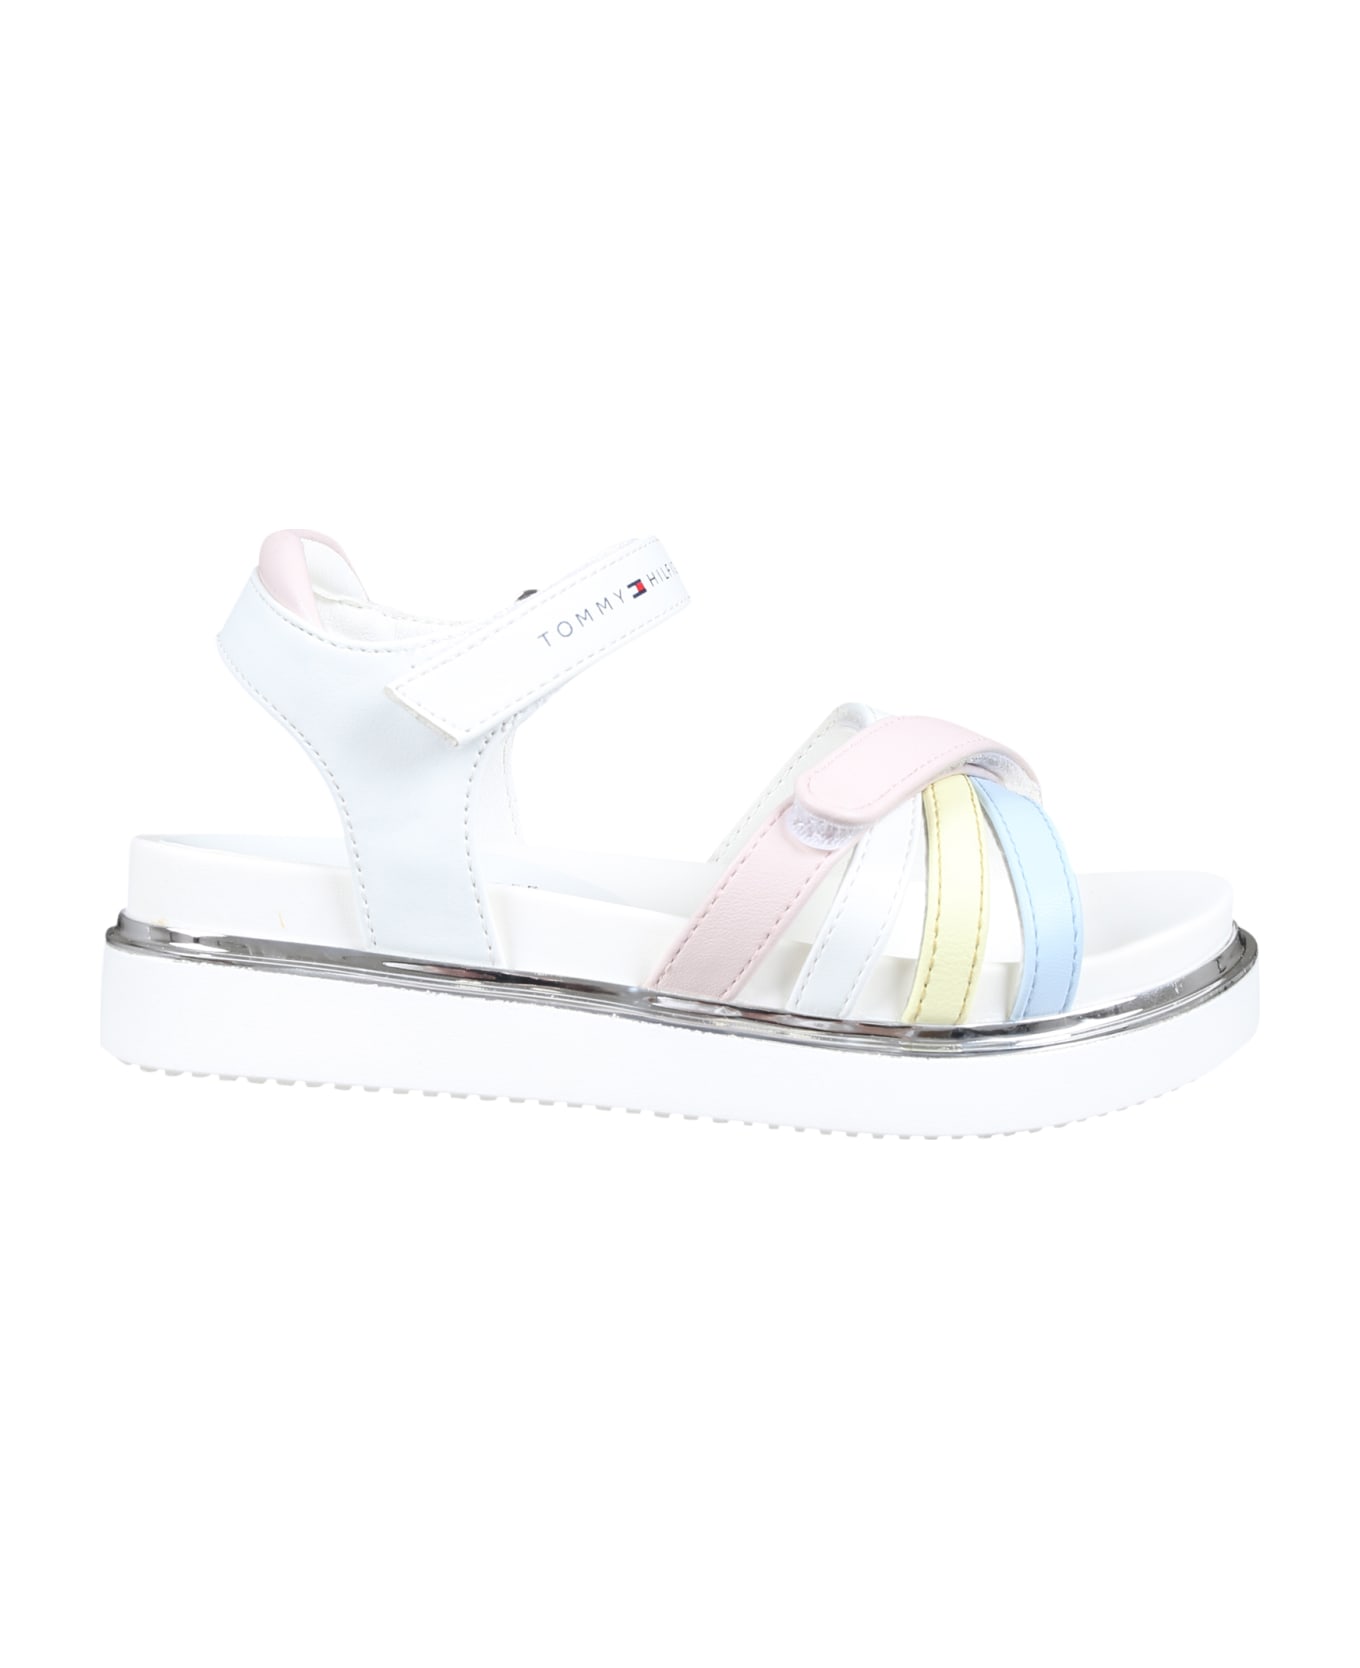 Tommy Hilfiger White Sandals For Girl With Logo - White シューズ